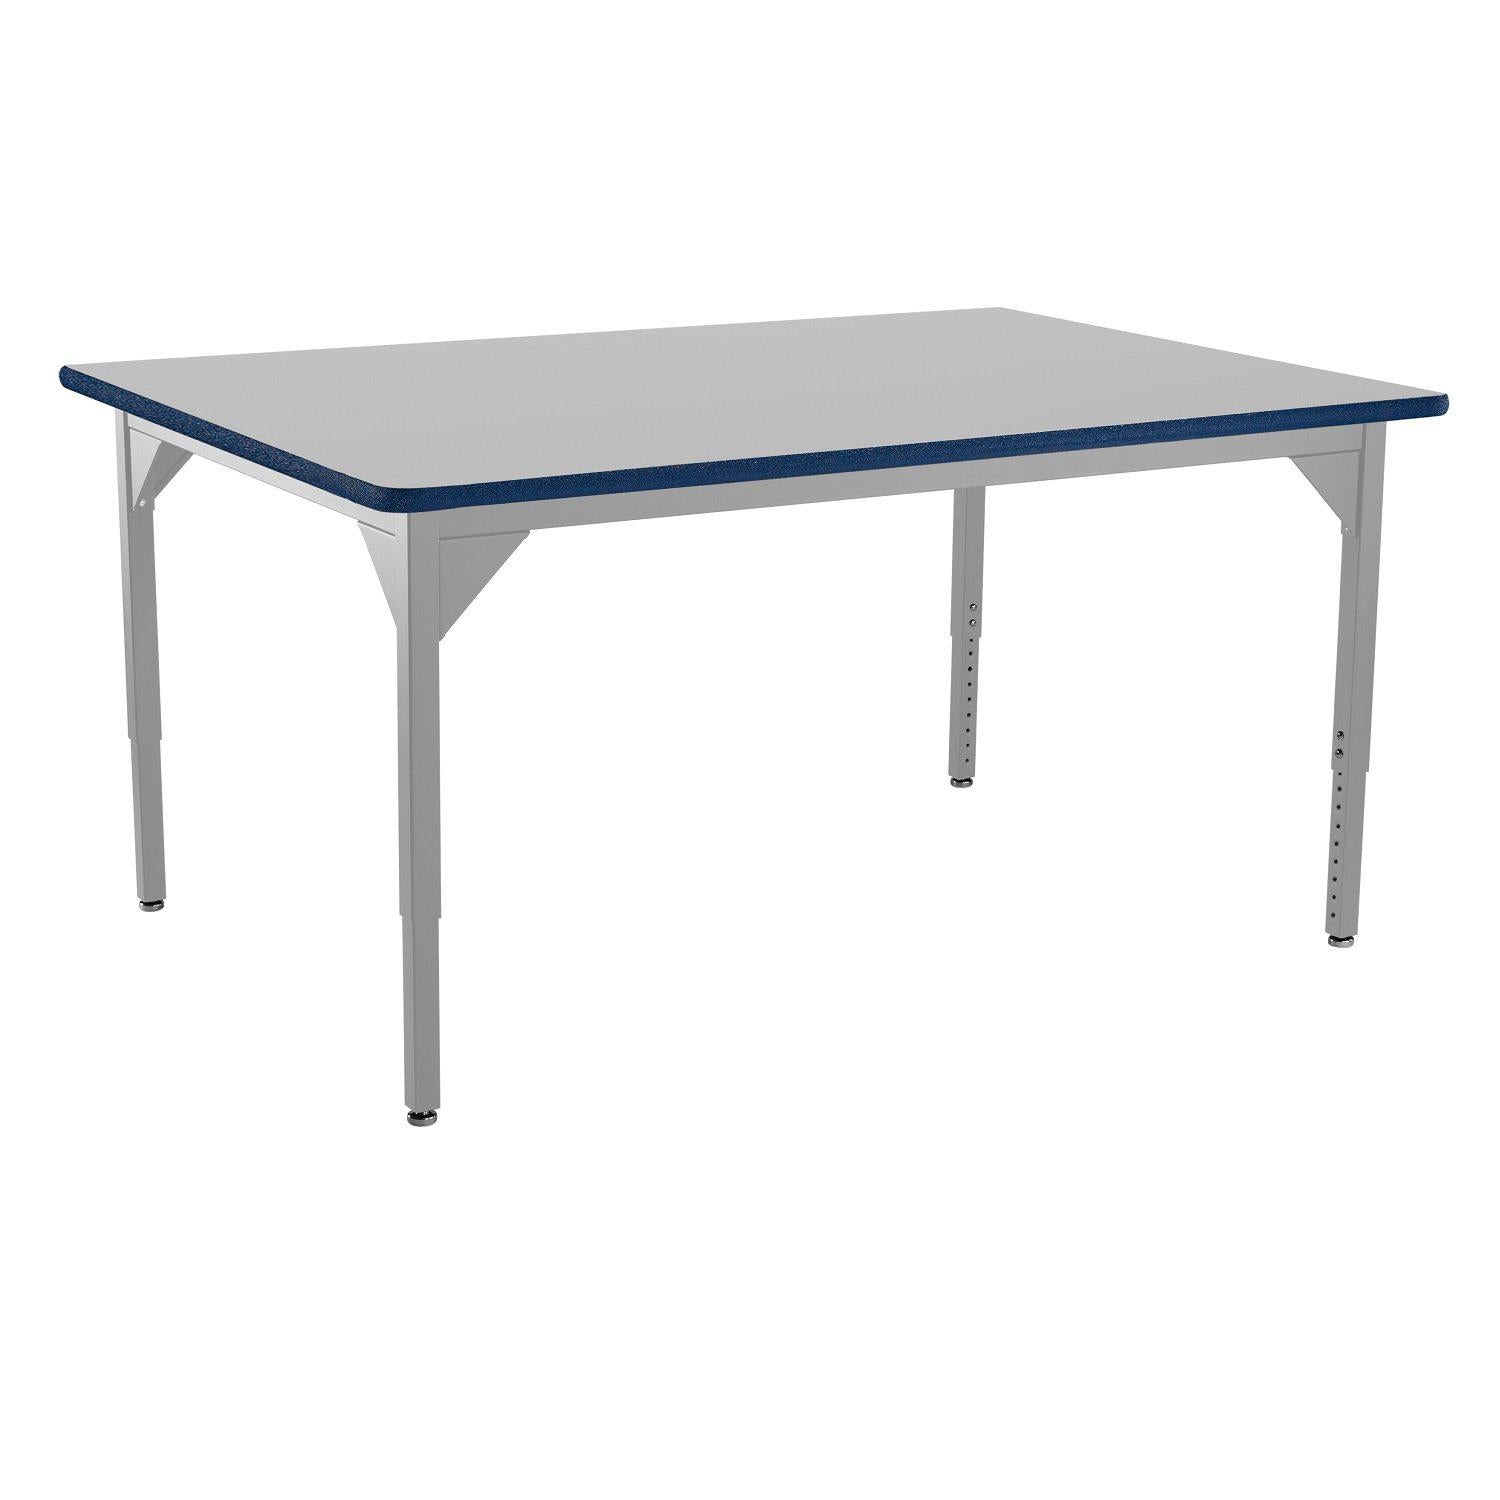 Heavy-Duty Height-Adjustable Utility Table, Soft Grey Frame, 48" x 48", Supreme High-Pressure Laminate Top with Black ProtectEdge